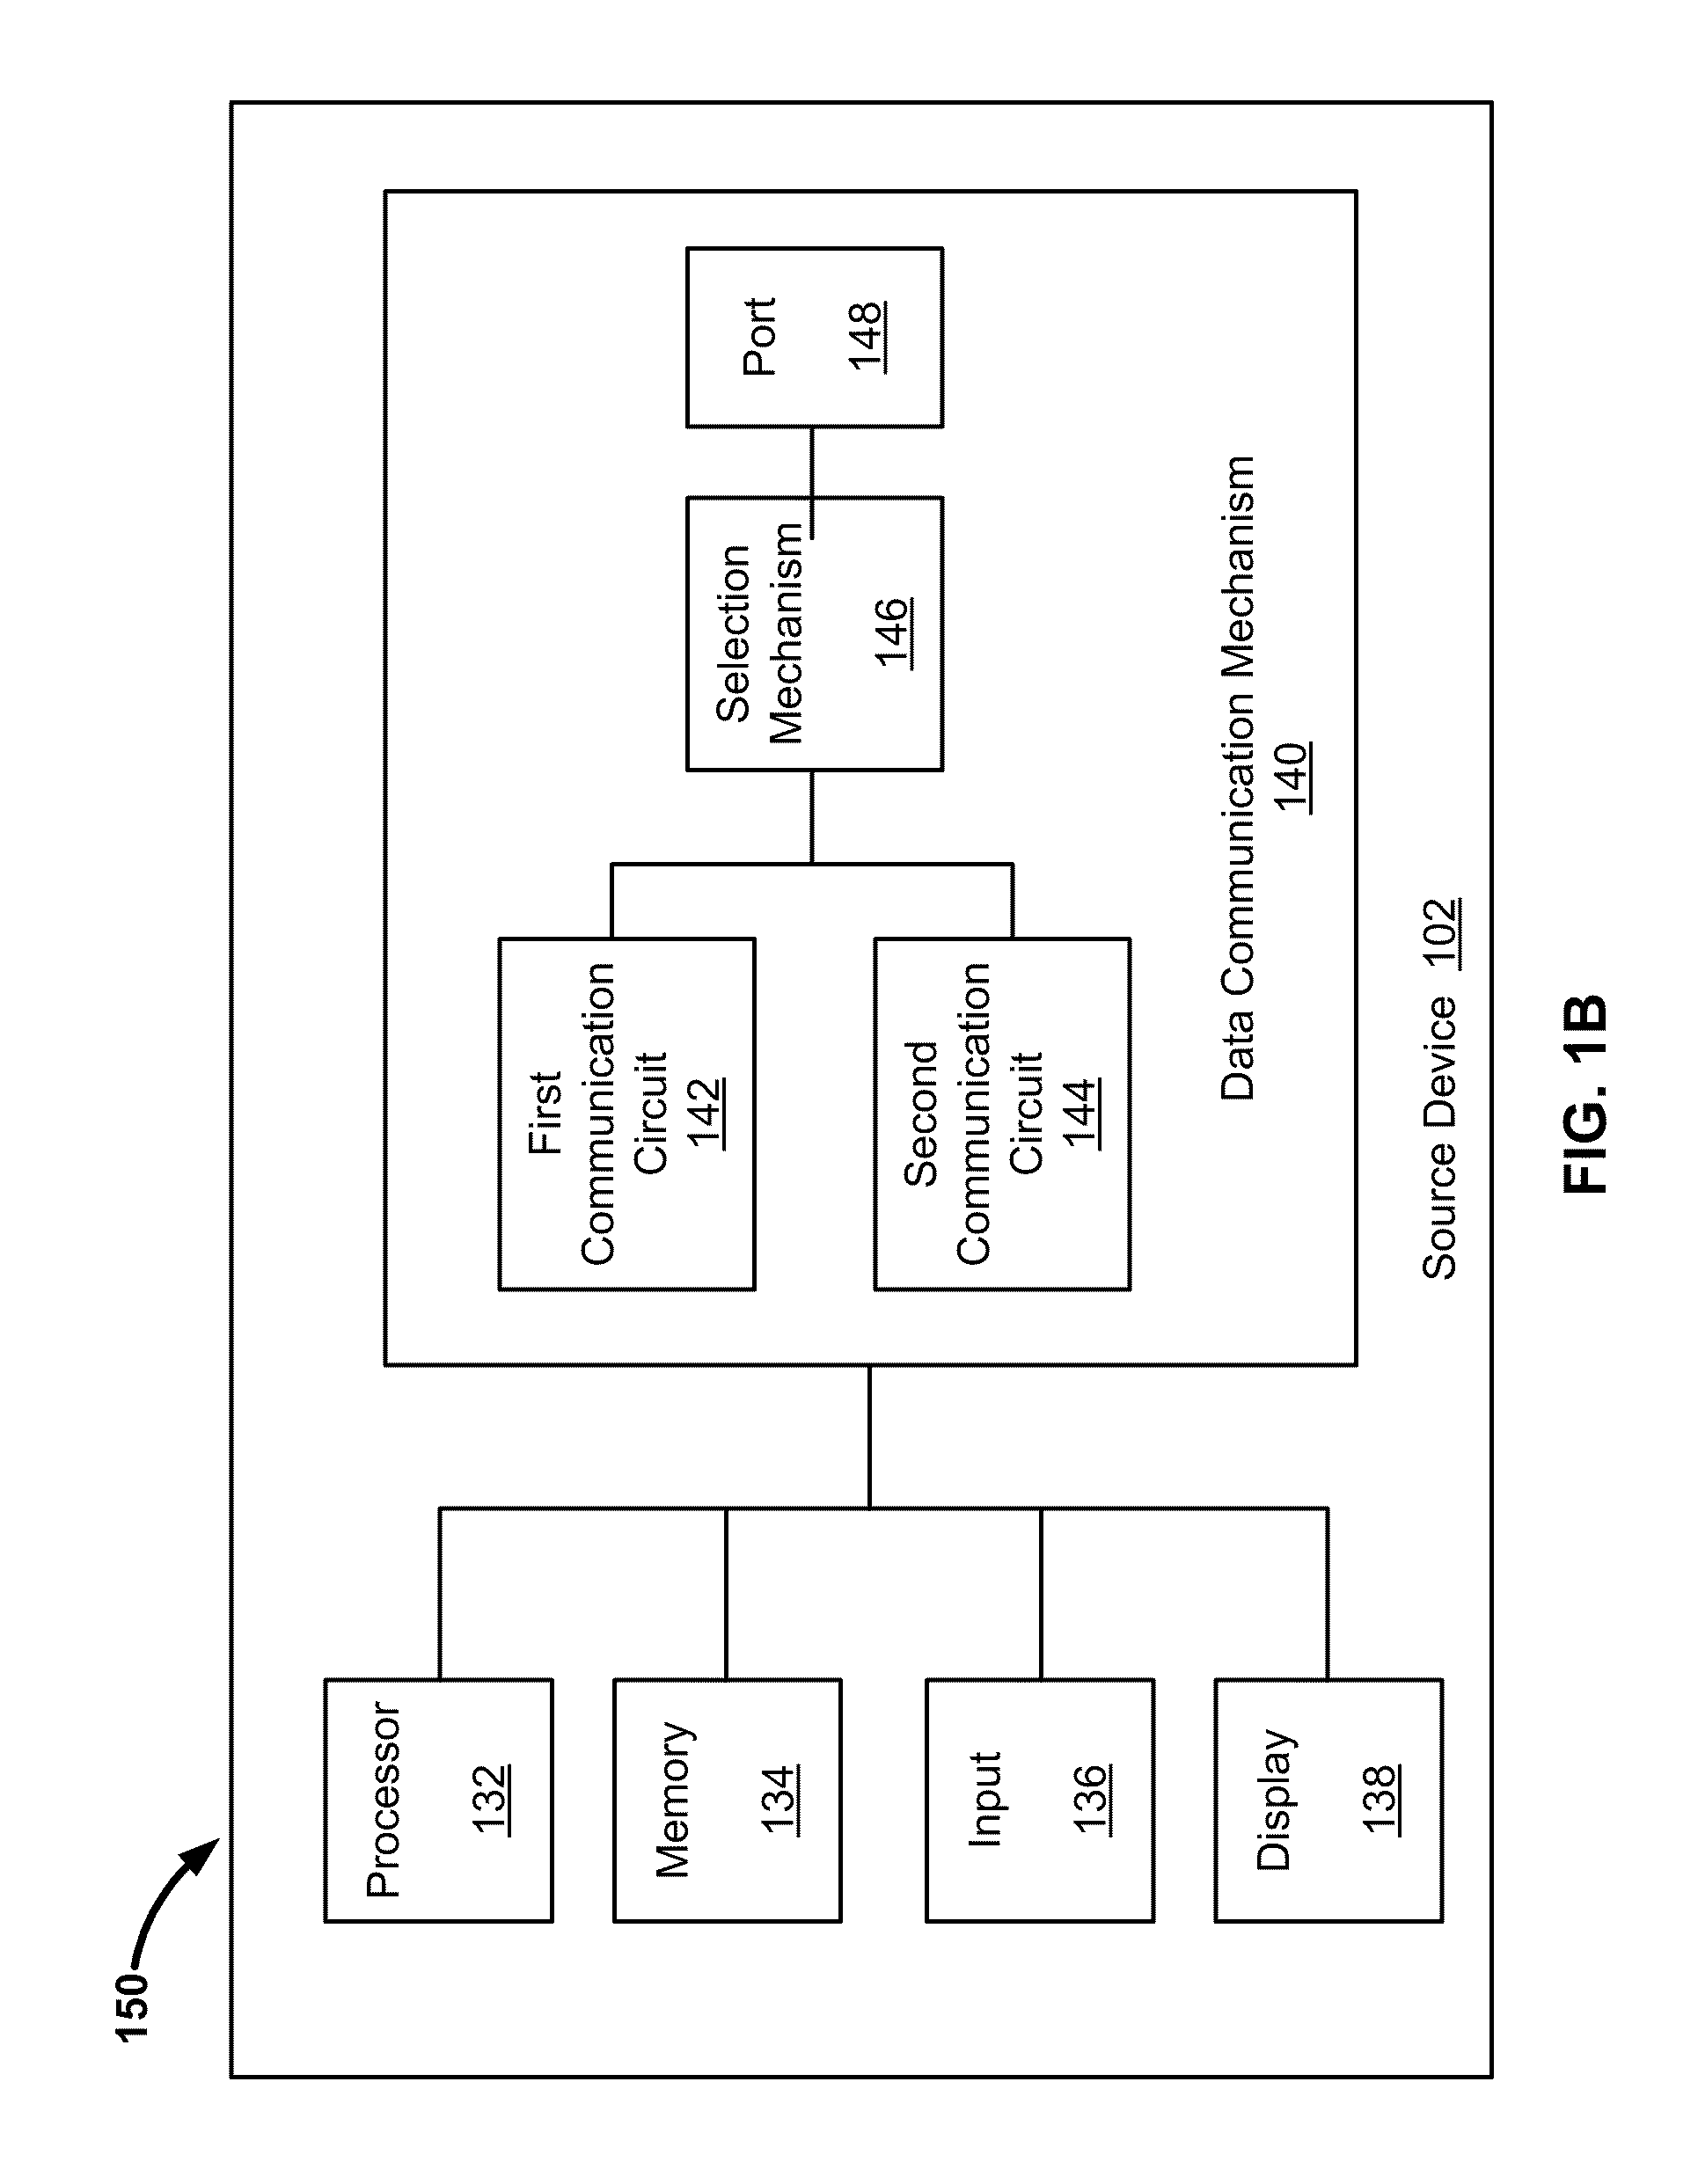 Dual-Mode Data Transfer of Uncompressed Multimedia Contents or Data Communications